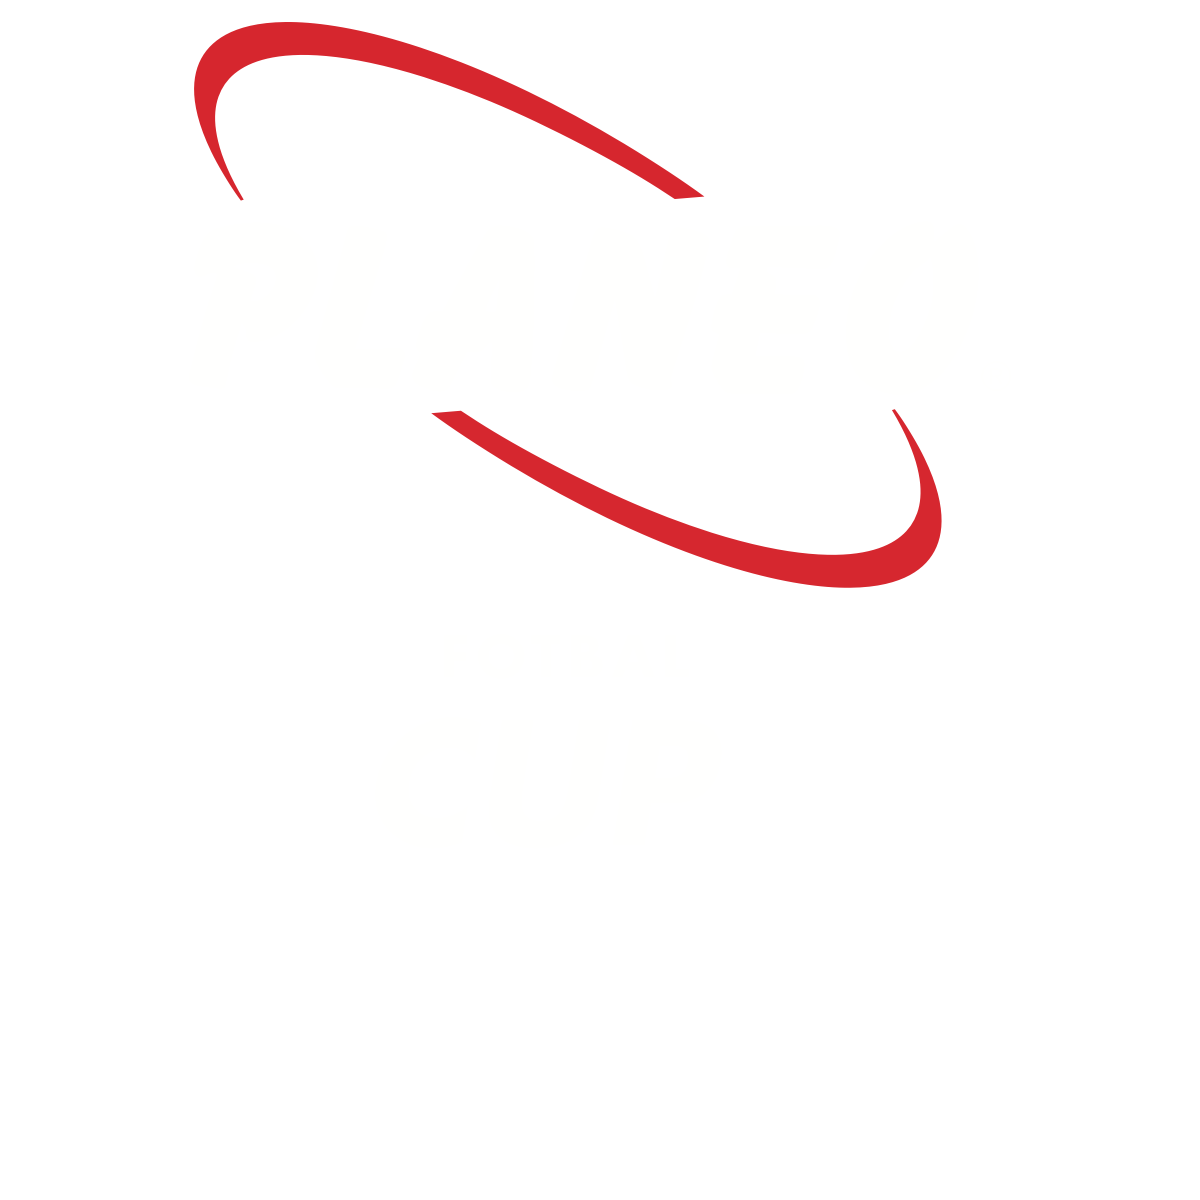 PLANEO CUP